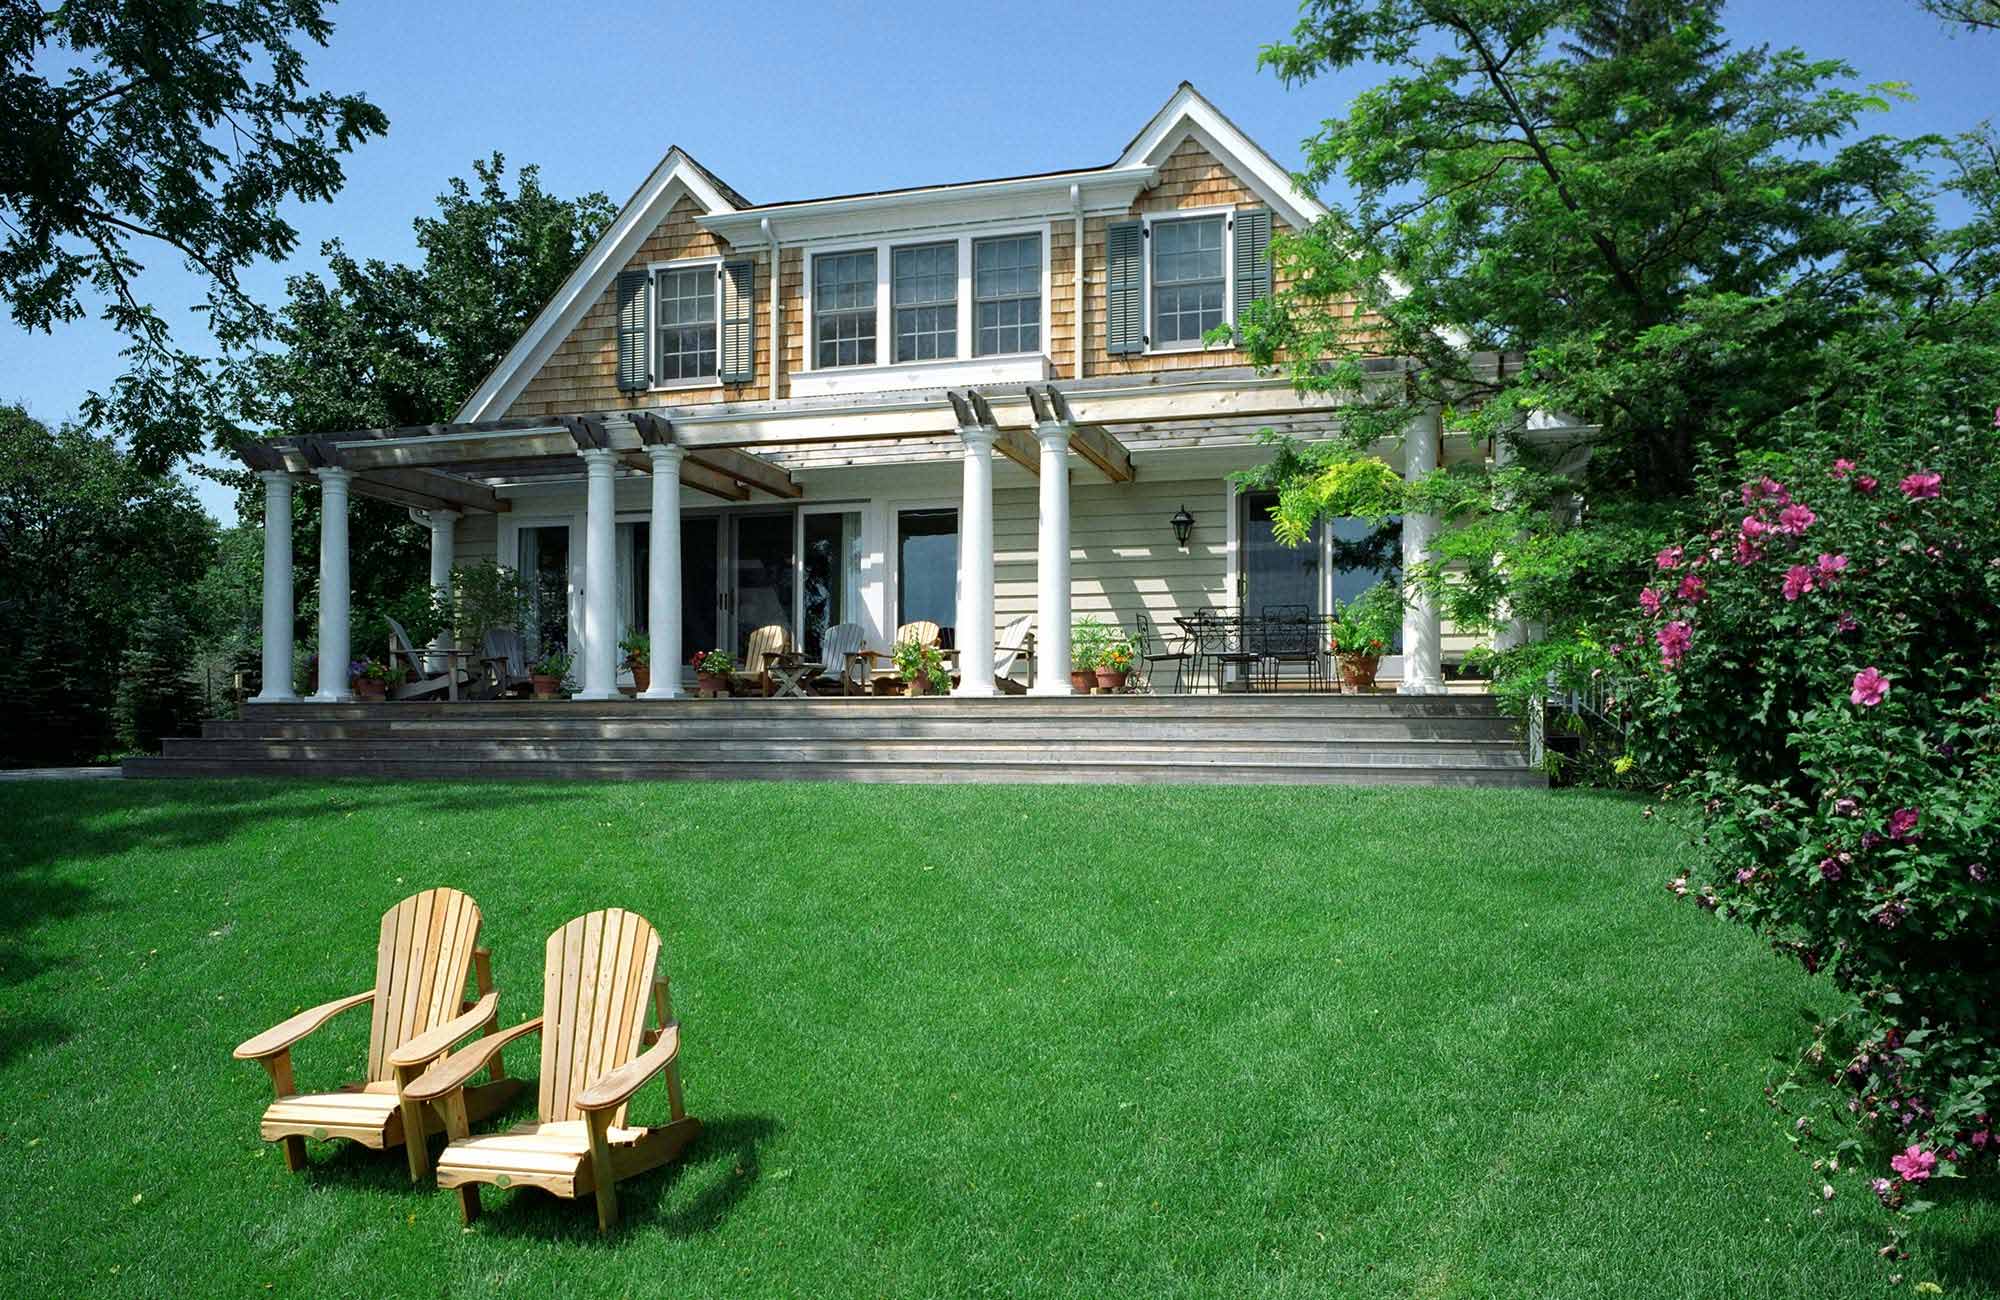 Beautiful, vivid green lawn with chairs in front of a columned home near Columbus, OH.